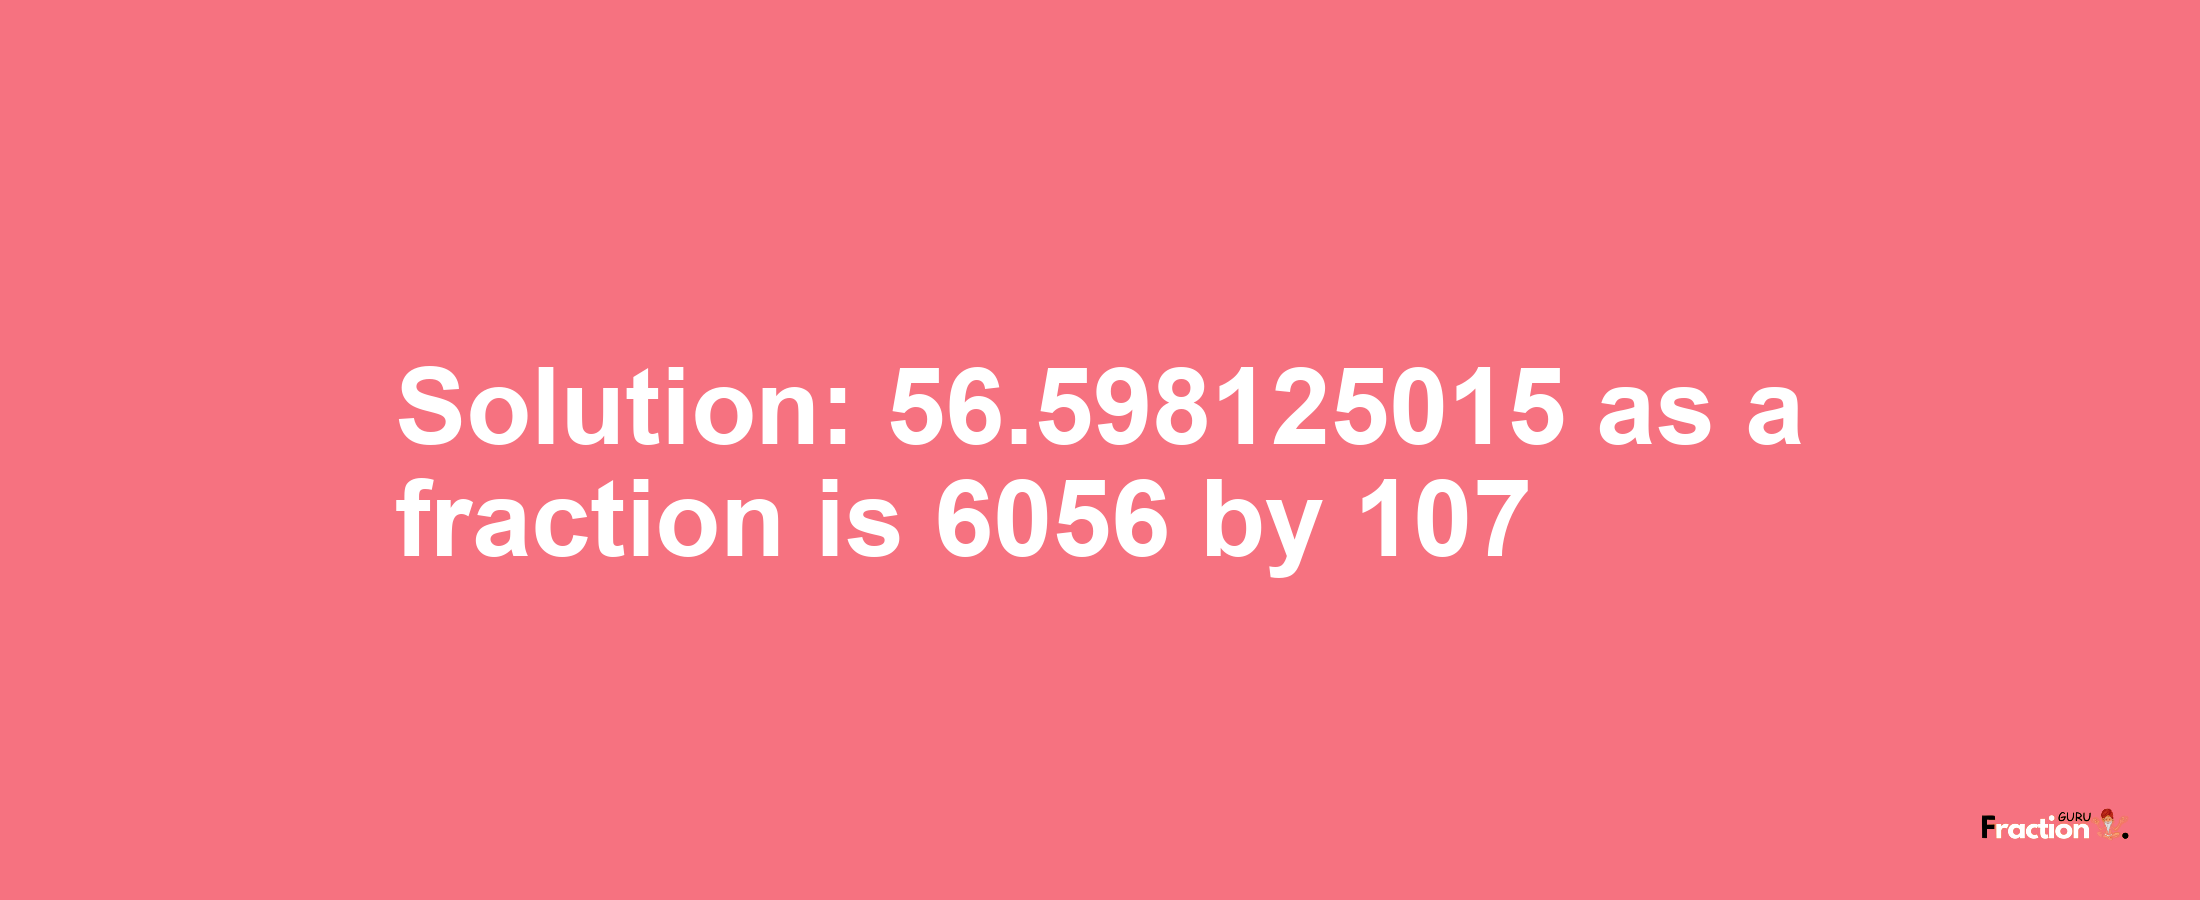 Solution:56.598125015 as a fraction is 6056/107